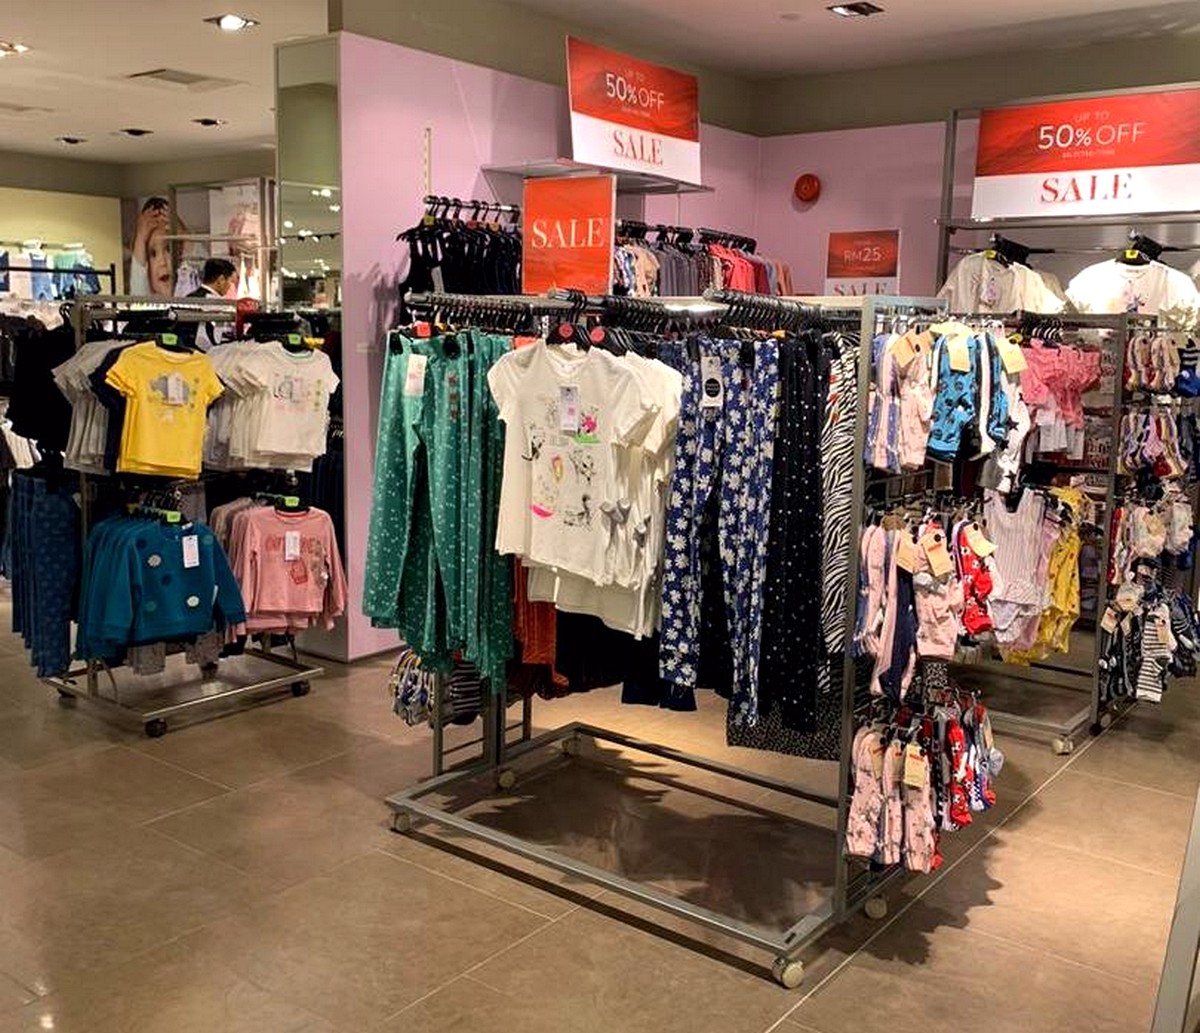 Marks-Spencer-Sale-Stores-Images-1 - Apparels Baby & Kids & Toys Children Fashion Fashion Accessories Fashion Lifestyle & Department Store Johor Kuala Lumpur Lingerie Nationwide Penang Selangor Sportswear Underwear Warehouse Sale & Clearance in Malaysia 